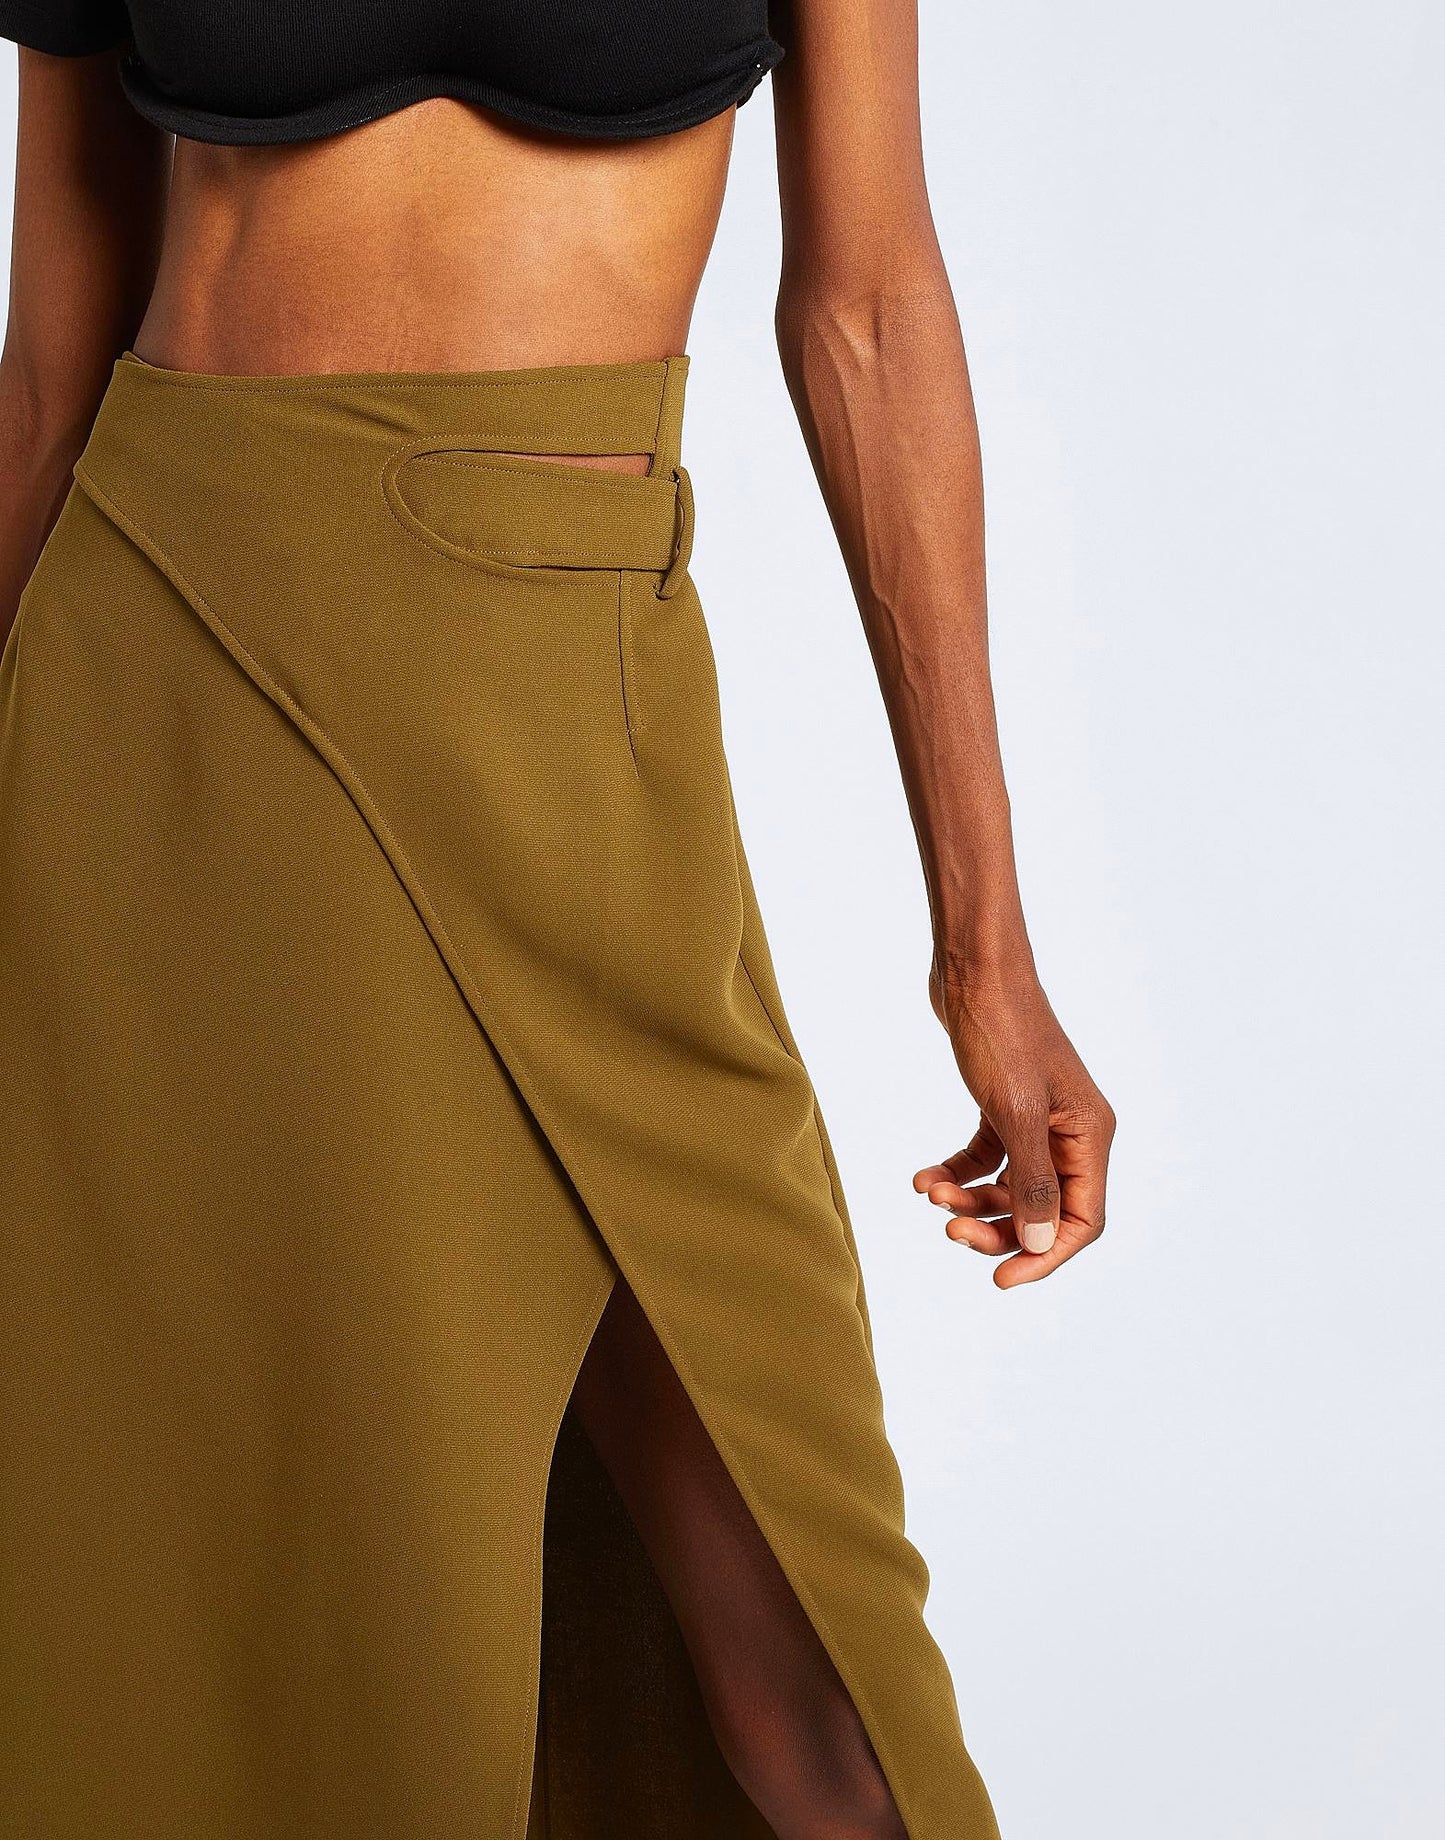 Military Green Crepe Midi Skirt With Cut-Out Detailing